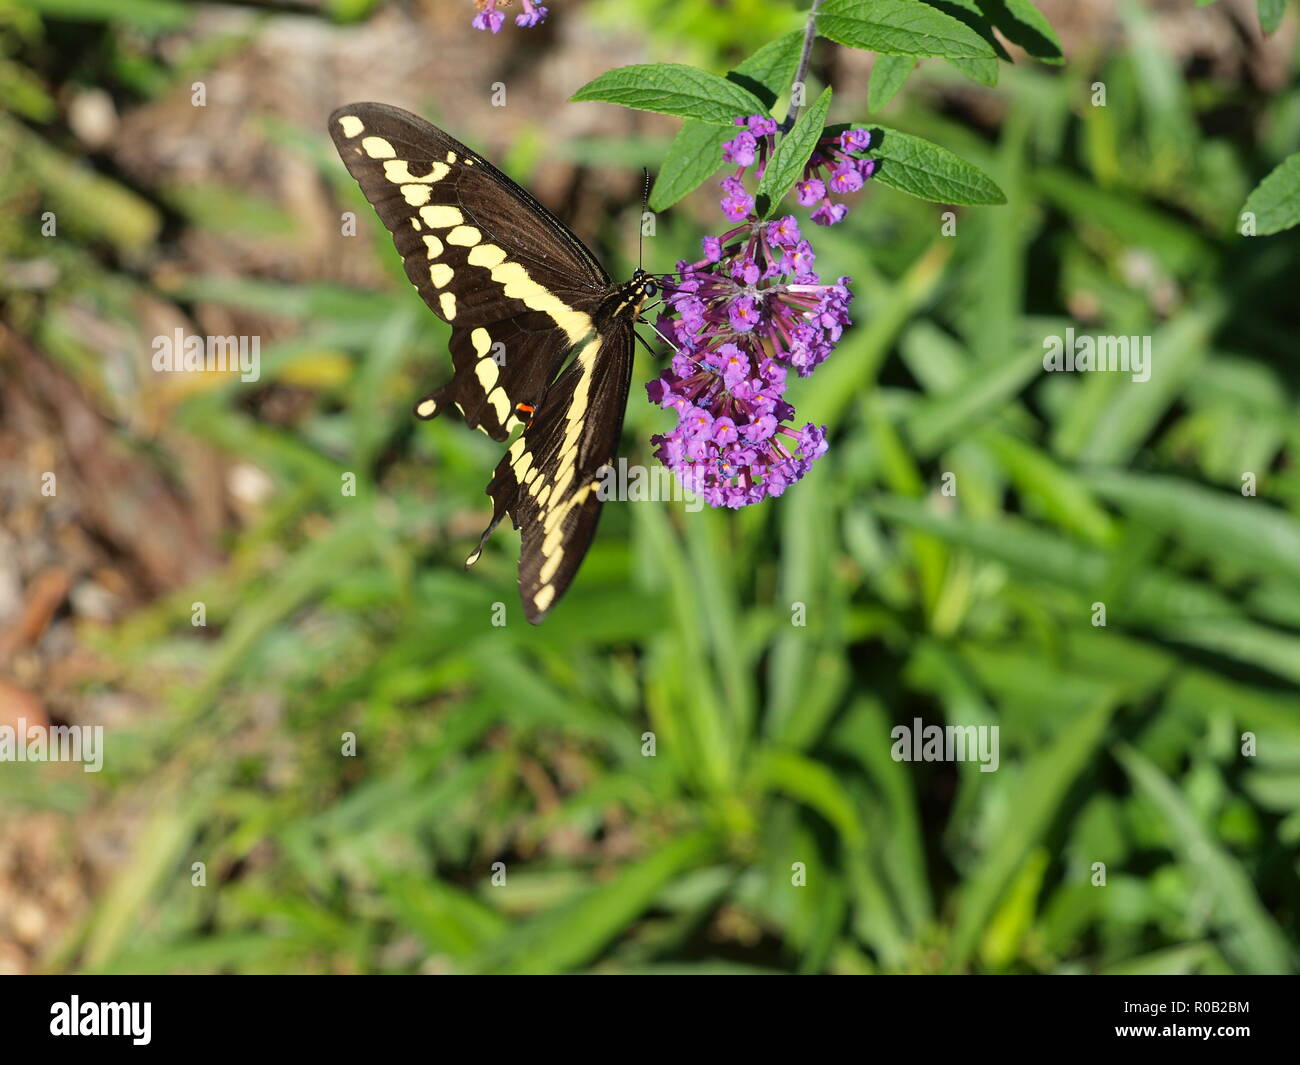 Yellow and Black Swallow Tail Butterfly. - OL73146 Stock Photo